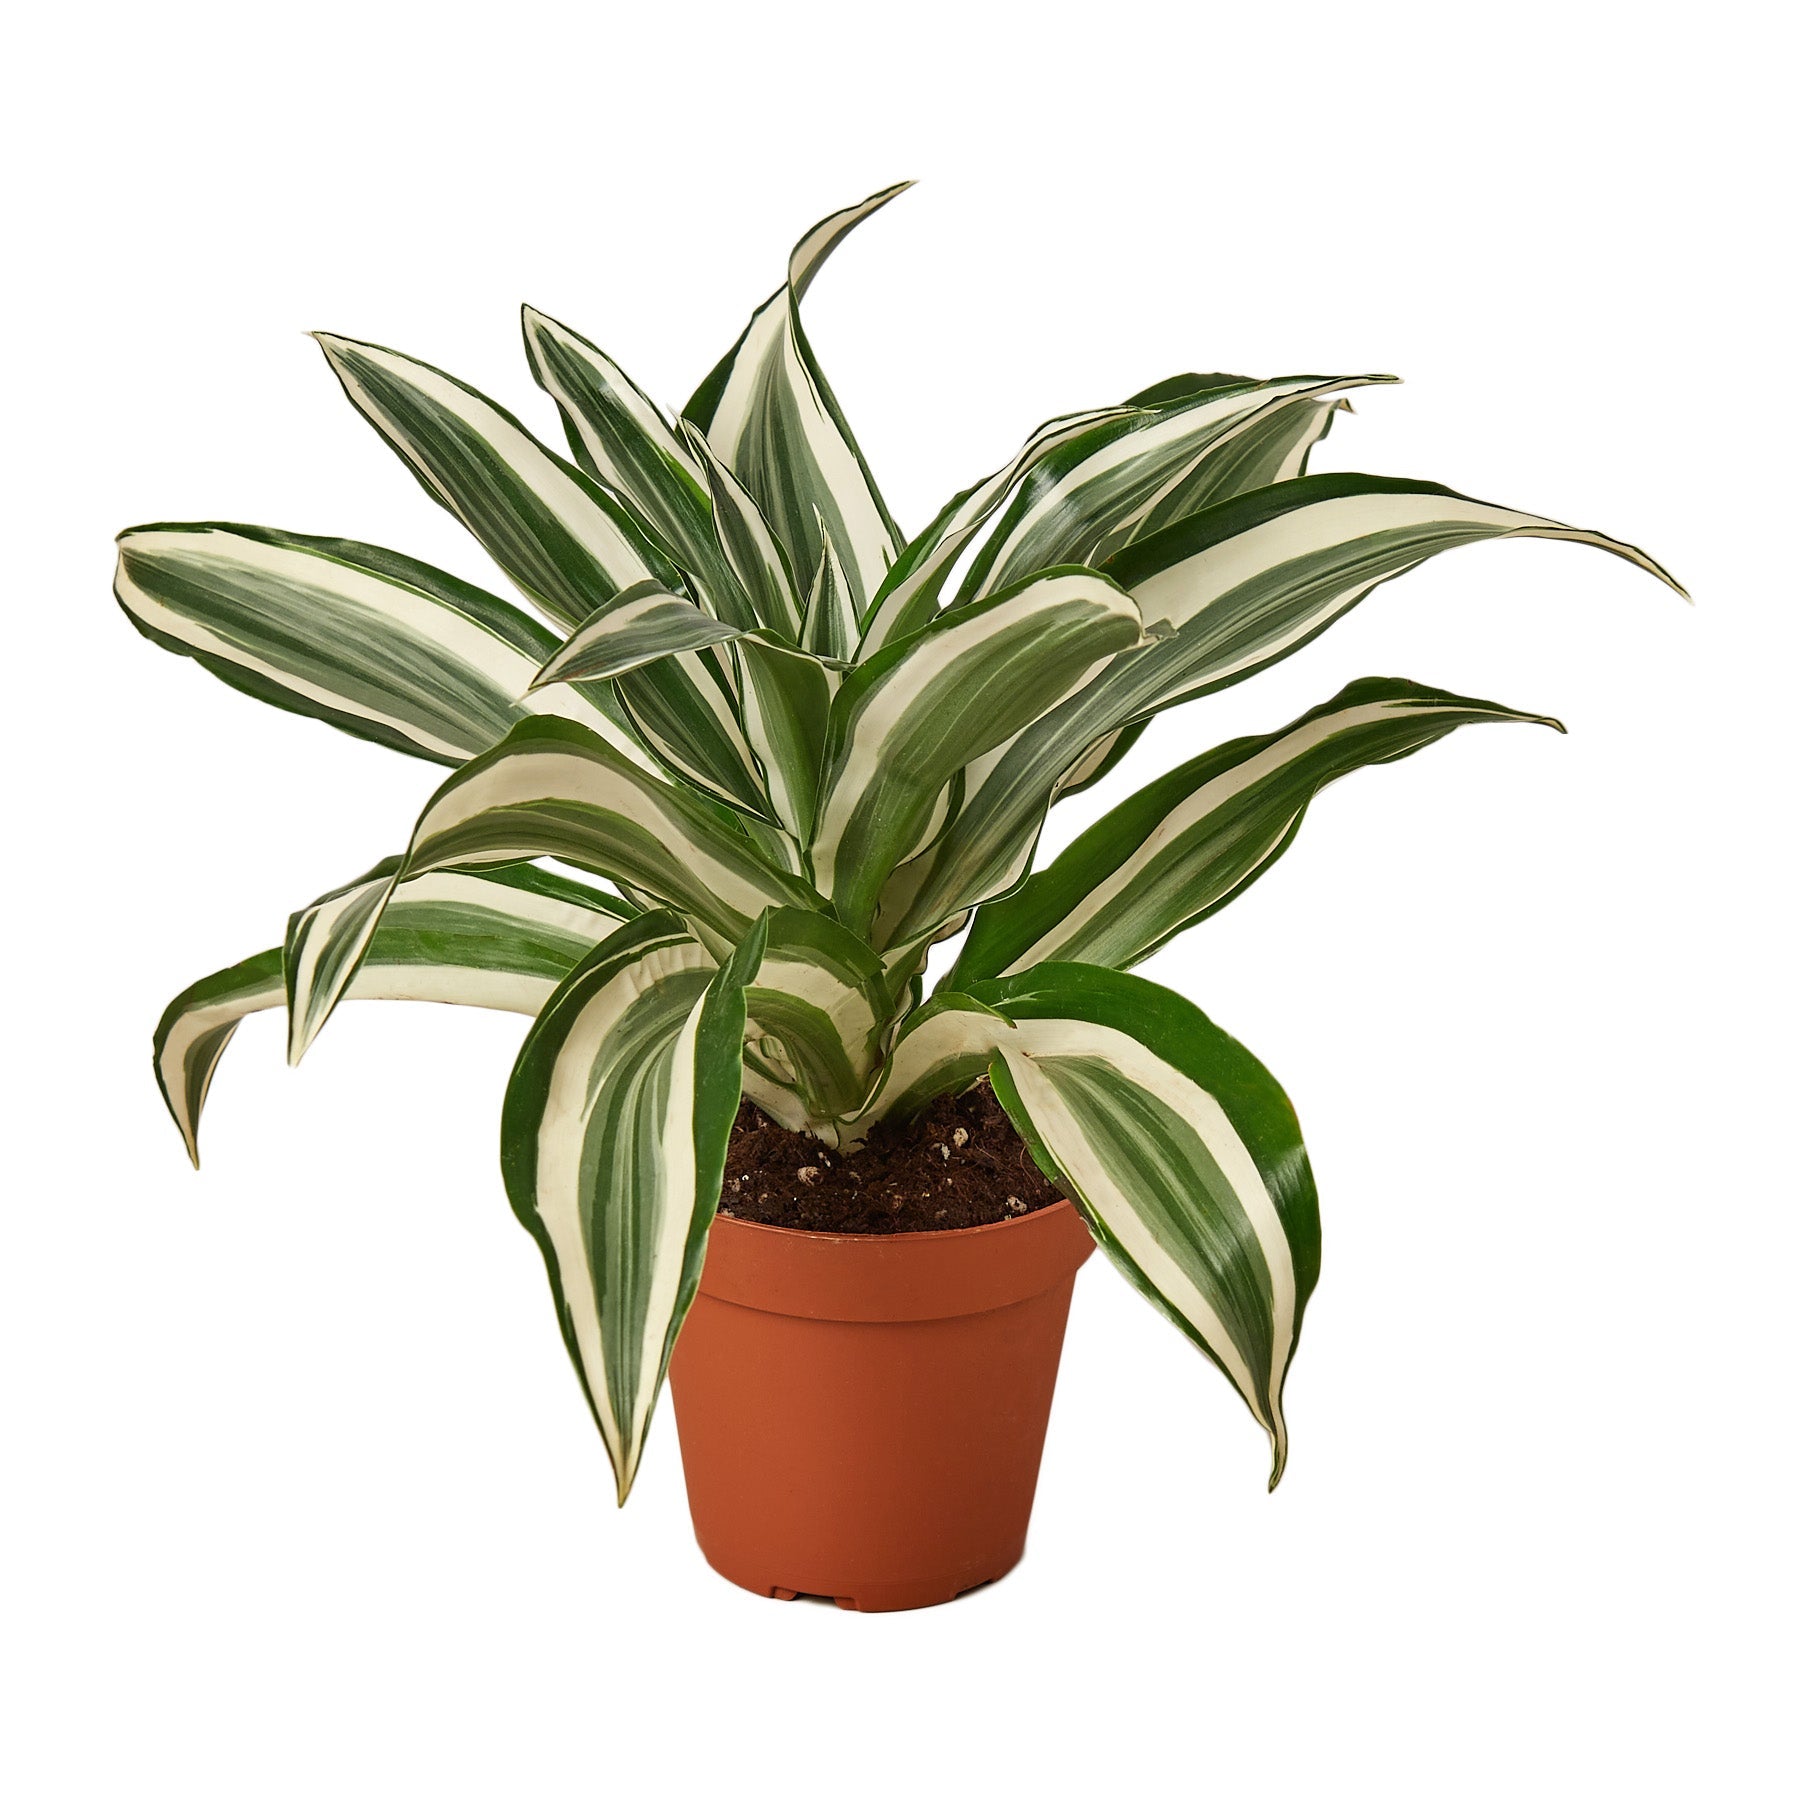 An aesthetically pleasing potted plant showcasing white and green stripes.